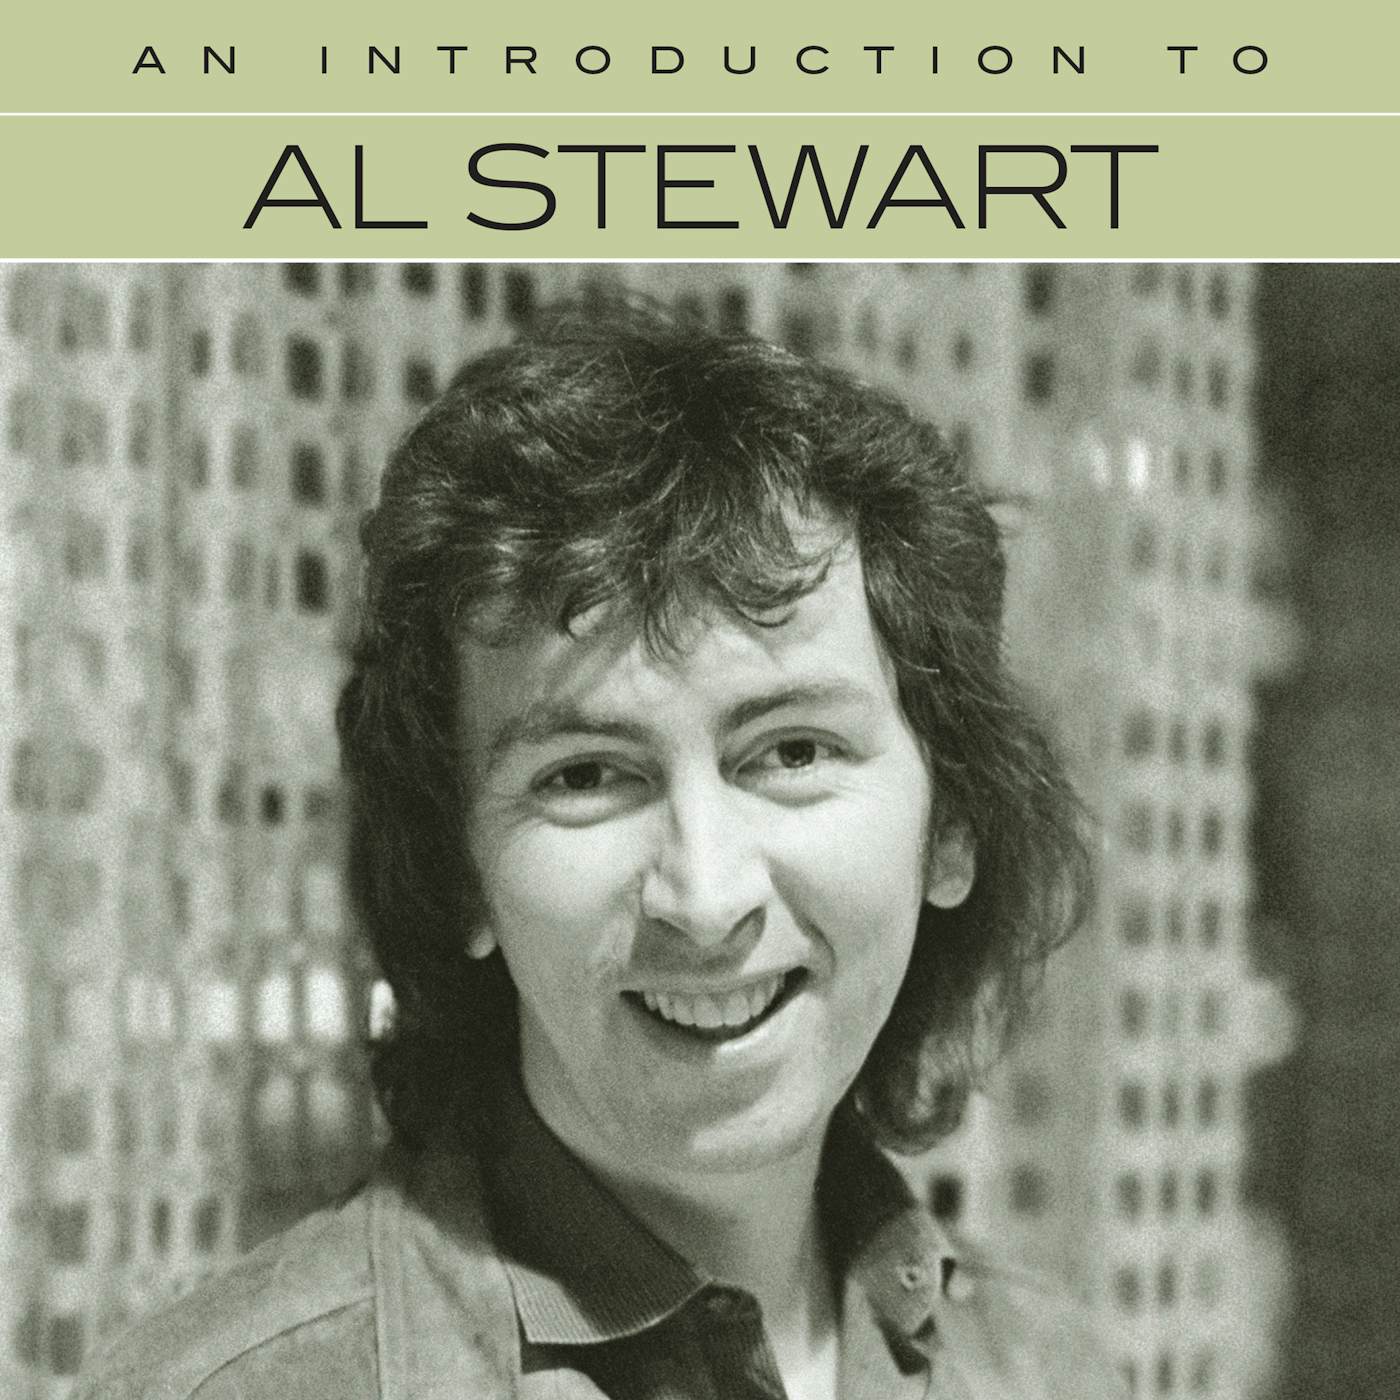 Al Stewart AN INTRODUCTION TO CD